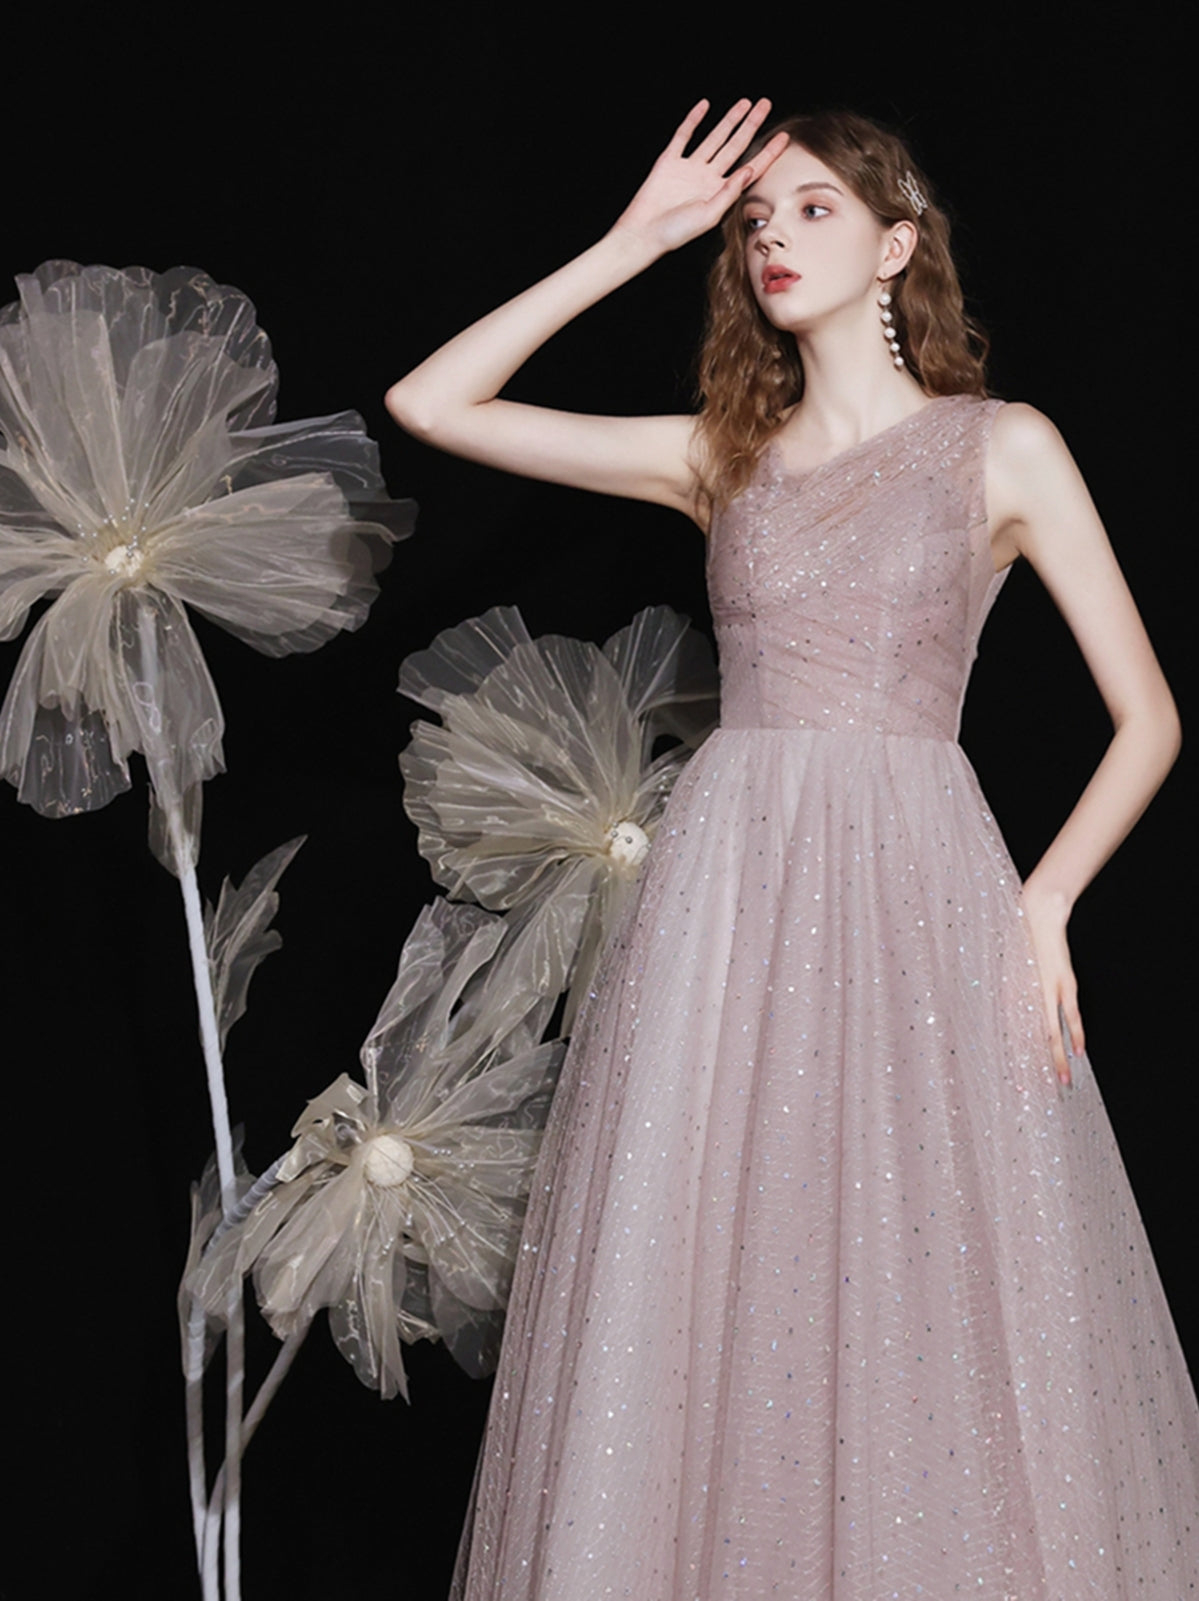 Sparkly Tulle Formal Ankle Length Prom Dress - DollyGown